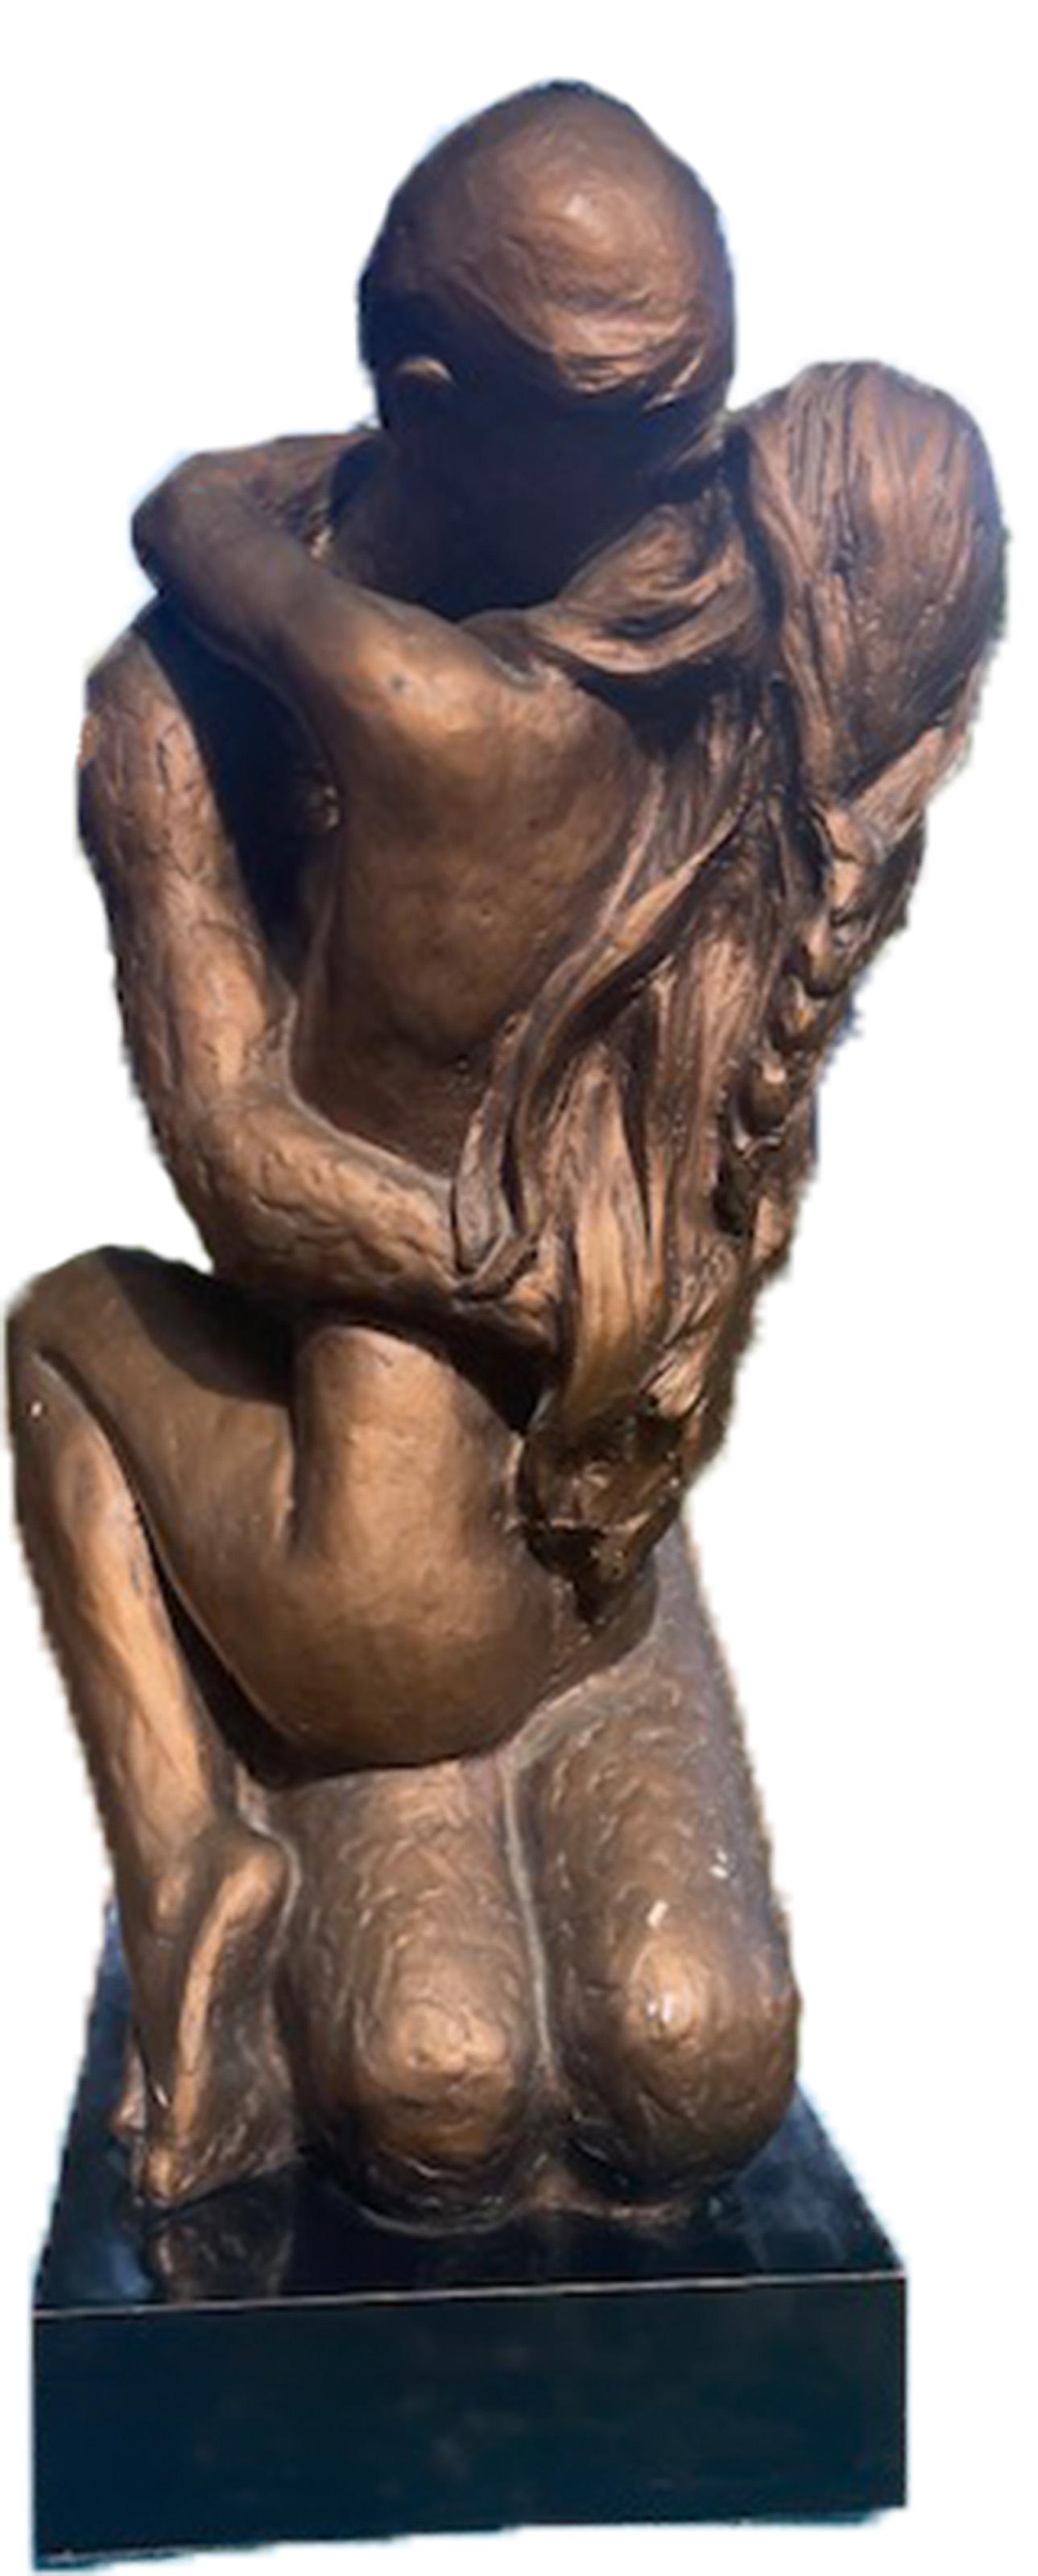 Two nude figures hold each other in a tender embrace, their eyes closed and hair spilling over their shoulders and across their backs. Although rendered in resin, a patina was added to recreate the effect of bronze. This piece is similar to a work